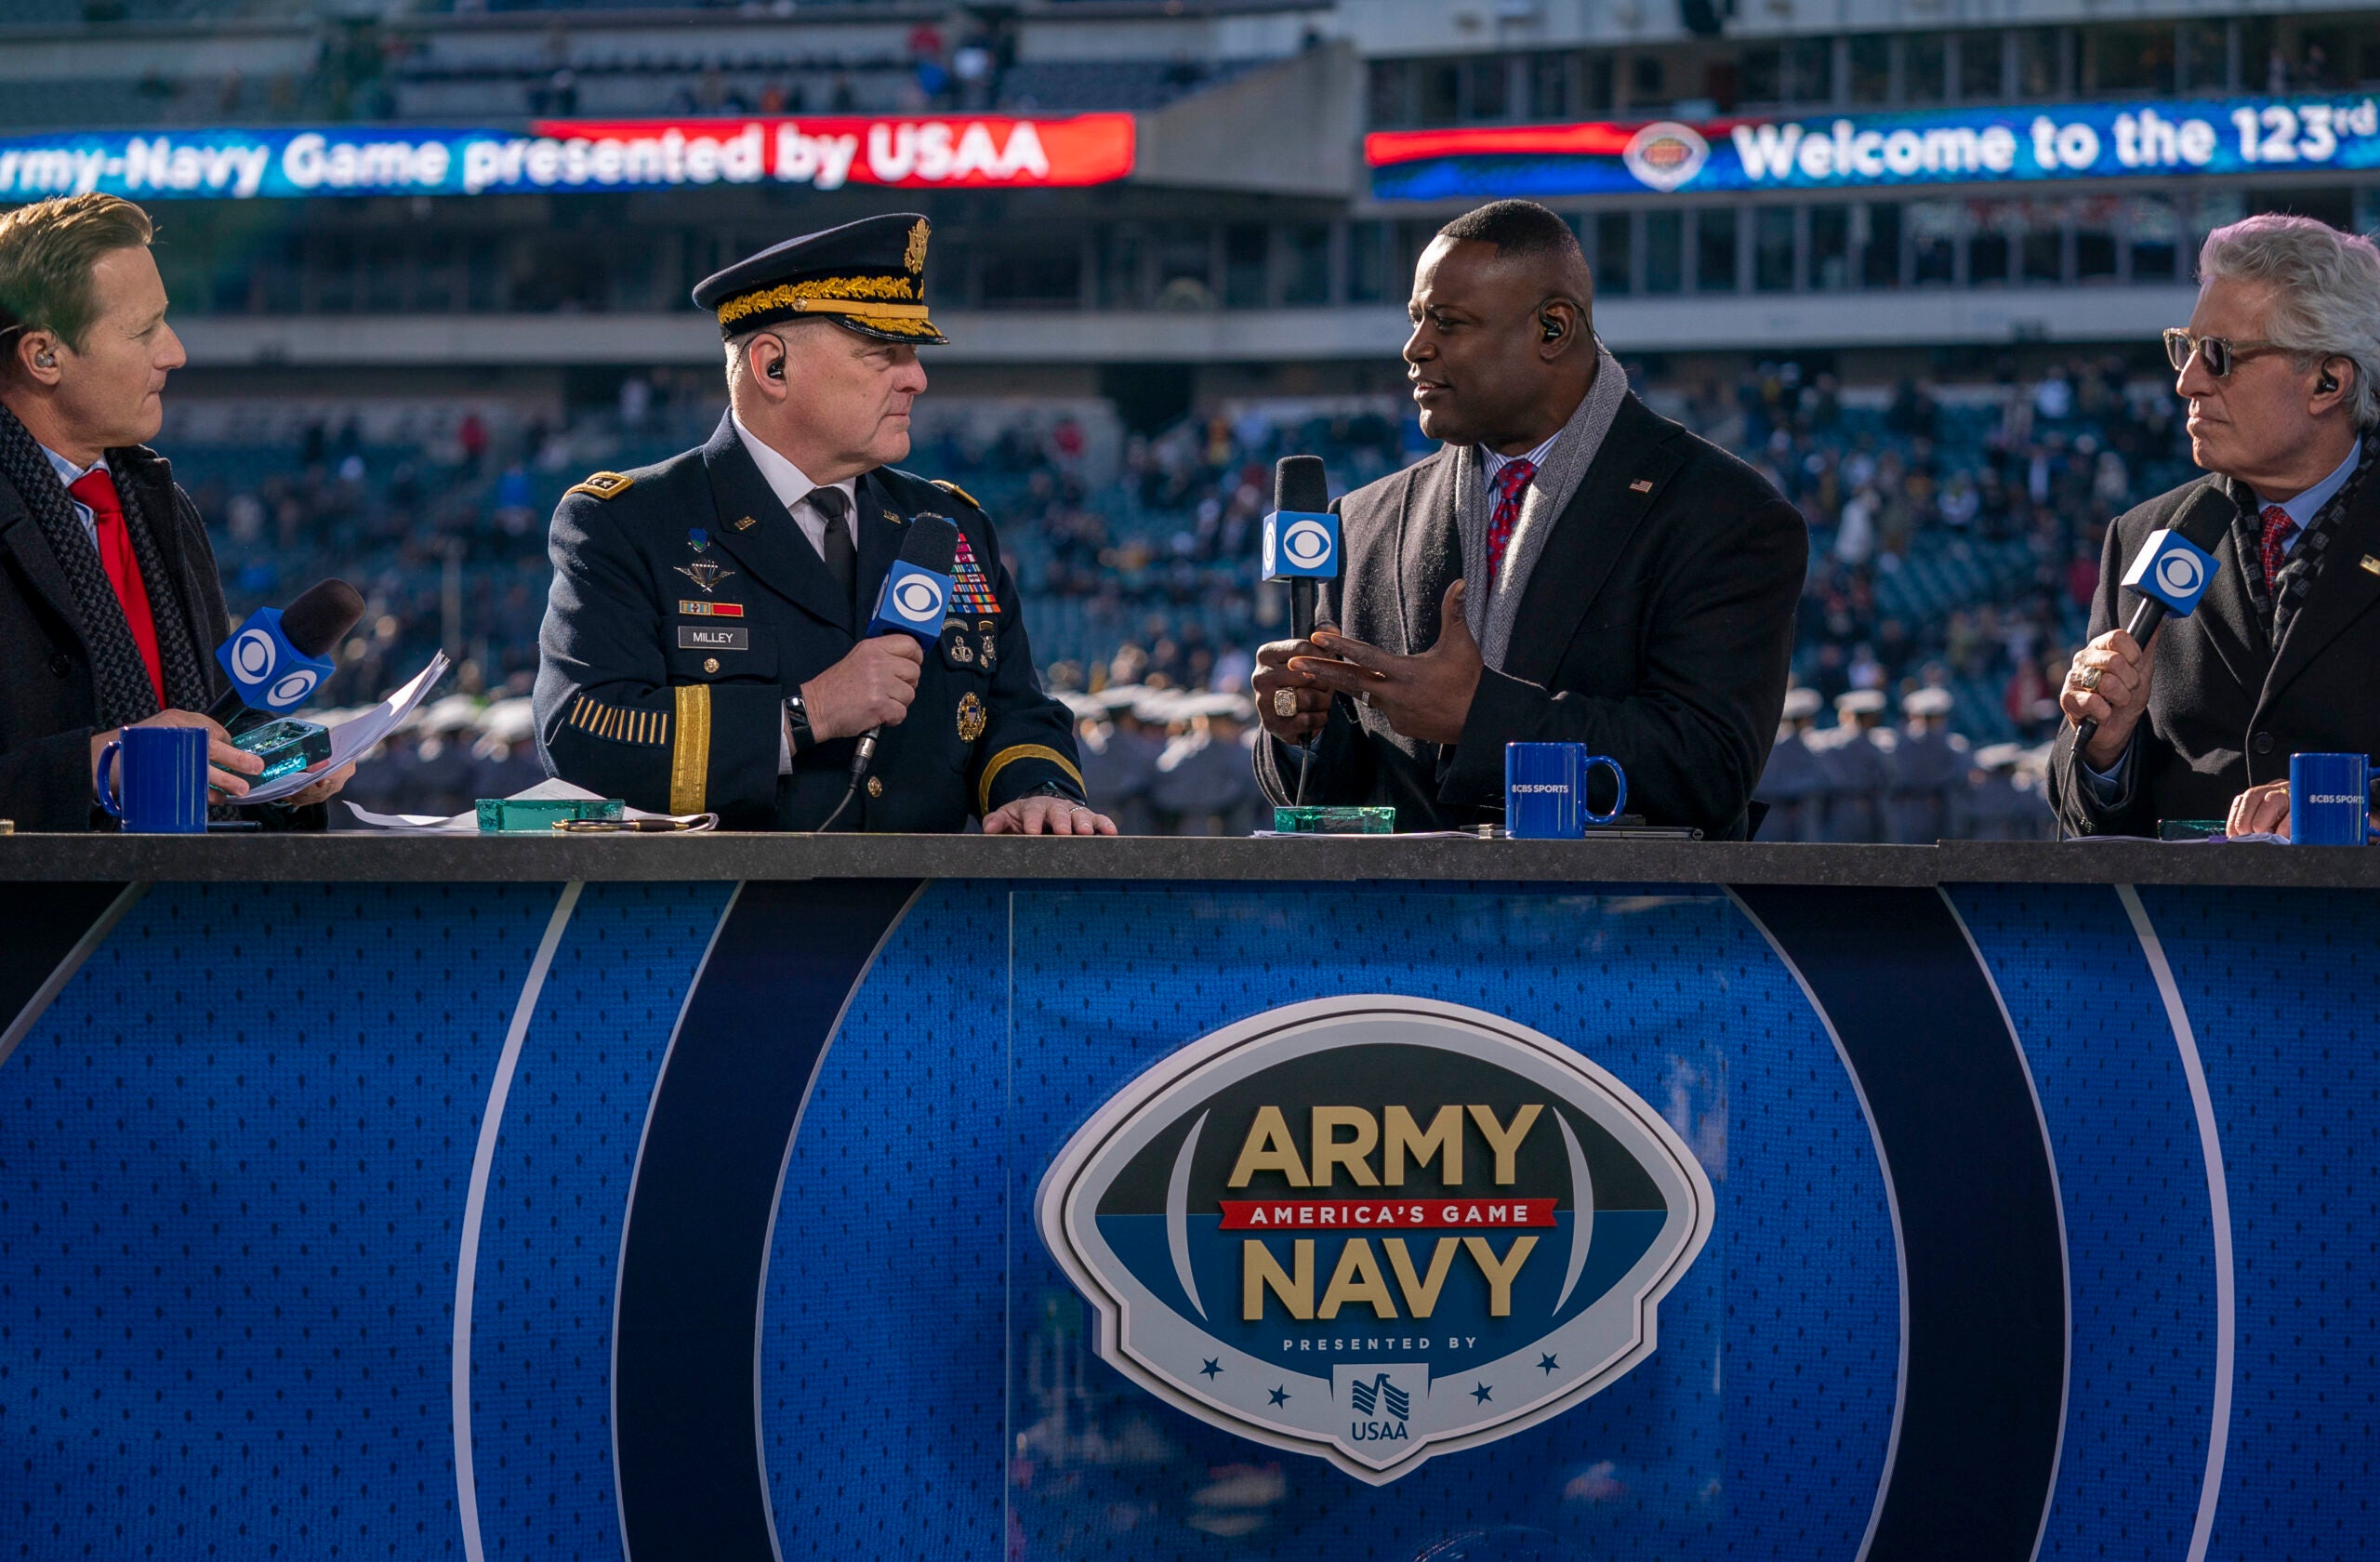 Army Gen. Mark A. Milley, chairman of the Joint Chiefs of Staff, and Senior Enlisted Advisor to the Chairman (SEAC) Ramon "CZ" Colon-Lopez attend the 123rd Army-Navy game in Philadelphia, Dec. 10, 2022. The Army beat the Navy Midshipmen 20-17 in overtime. (DOD Photo by Navy Chief Petty Officer Carlos M. Vazquez II)